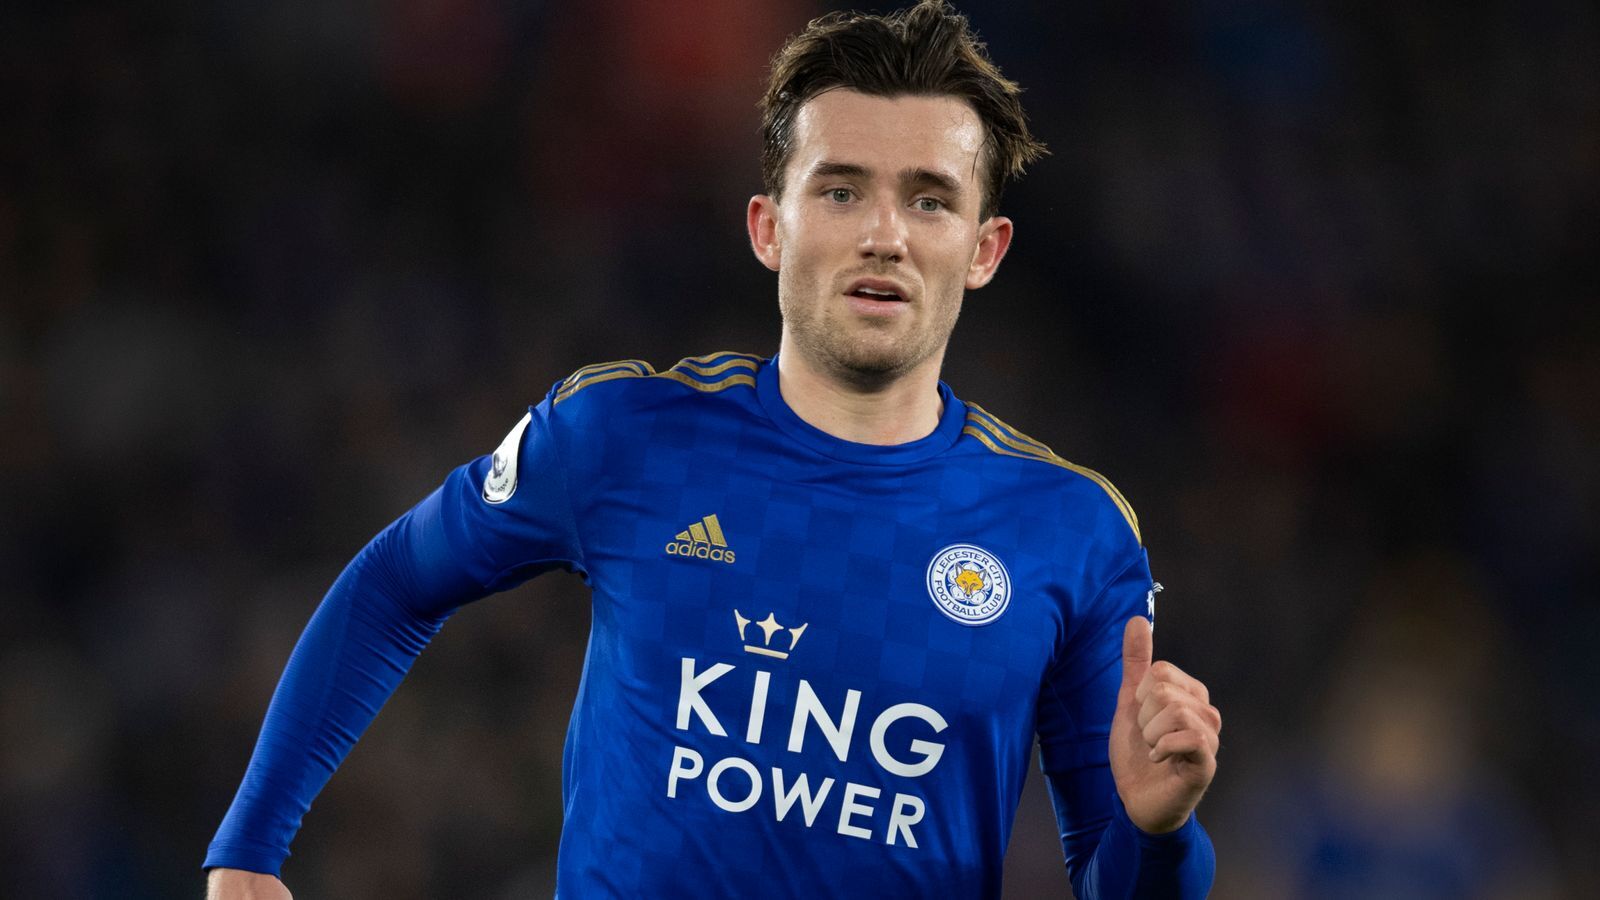 The Blues plan to sign Chilwell after £54m Werner deal  